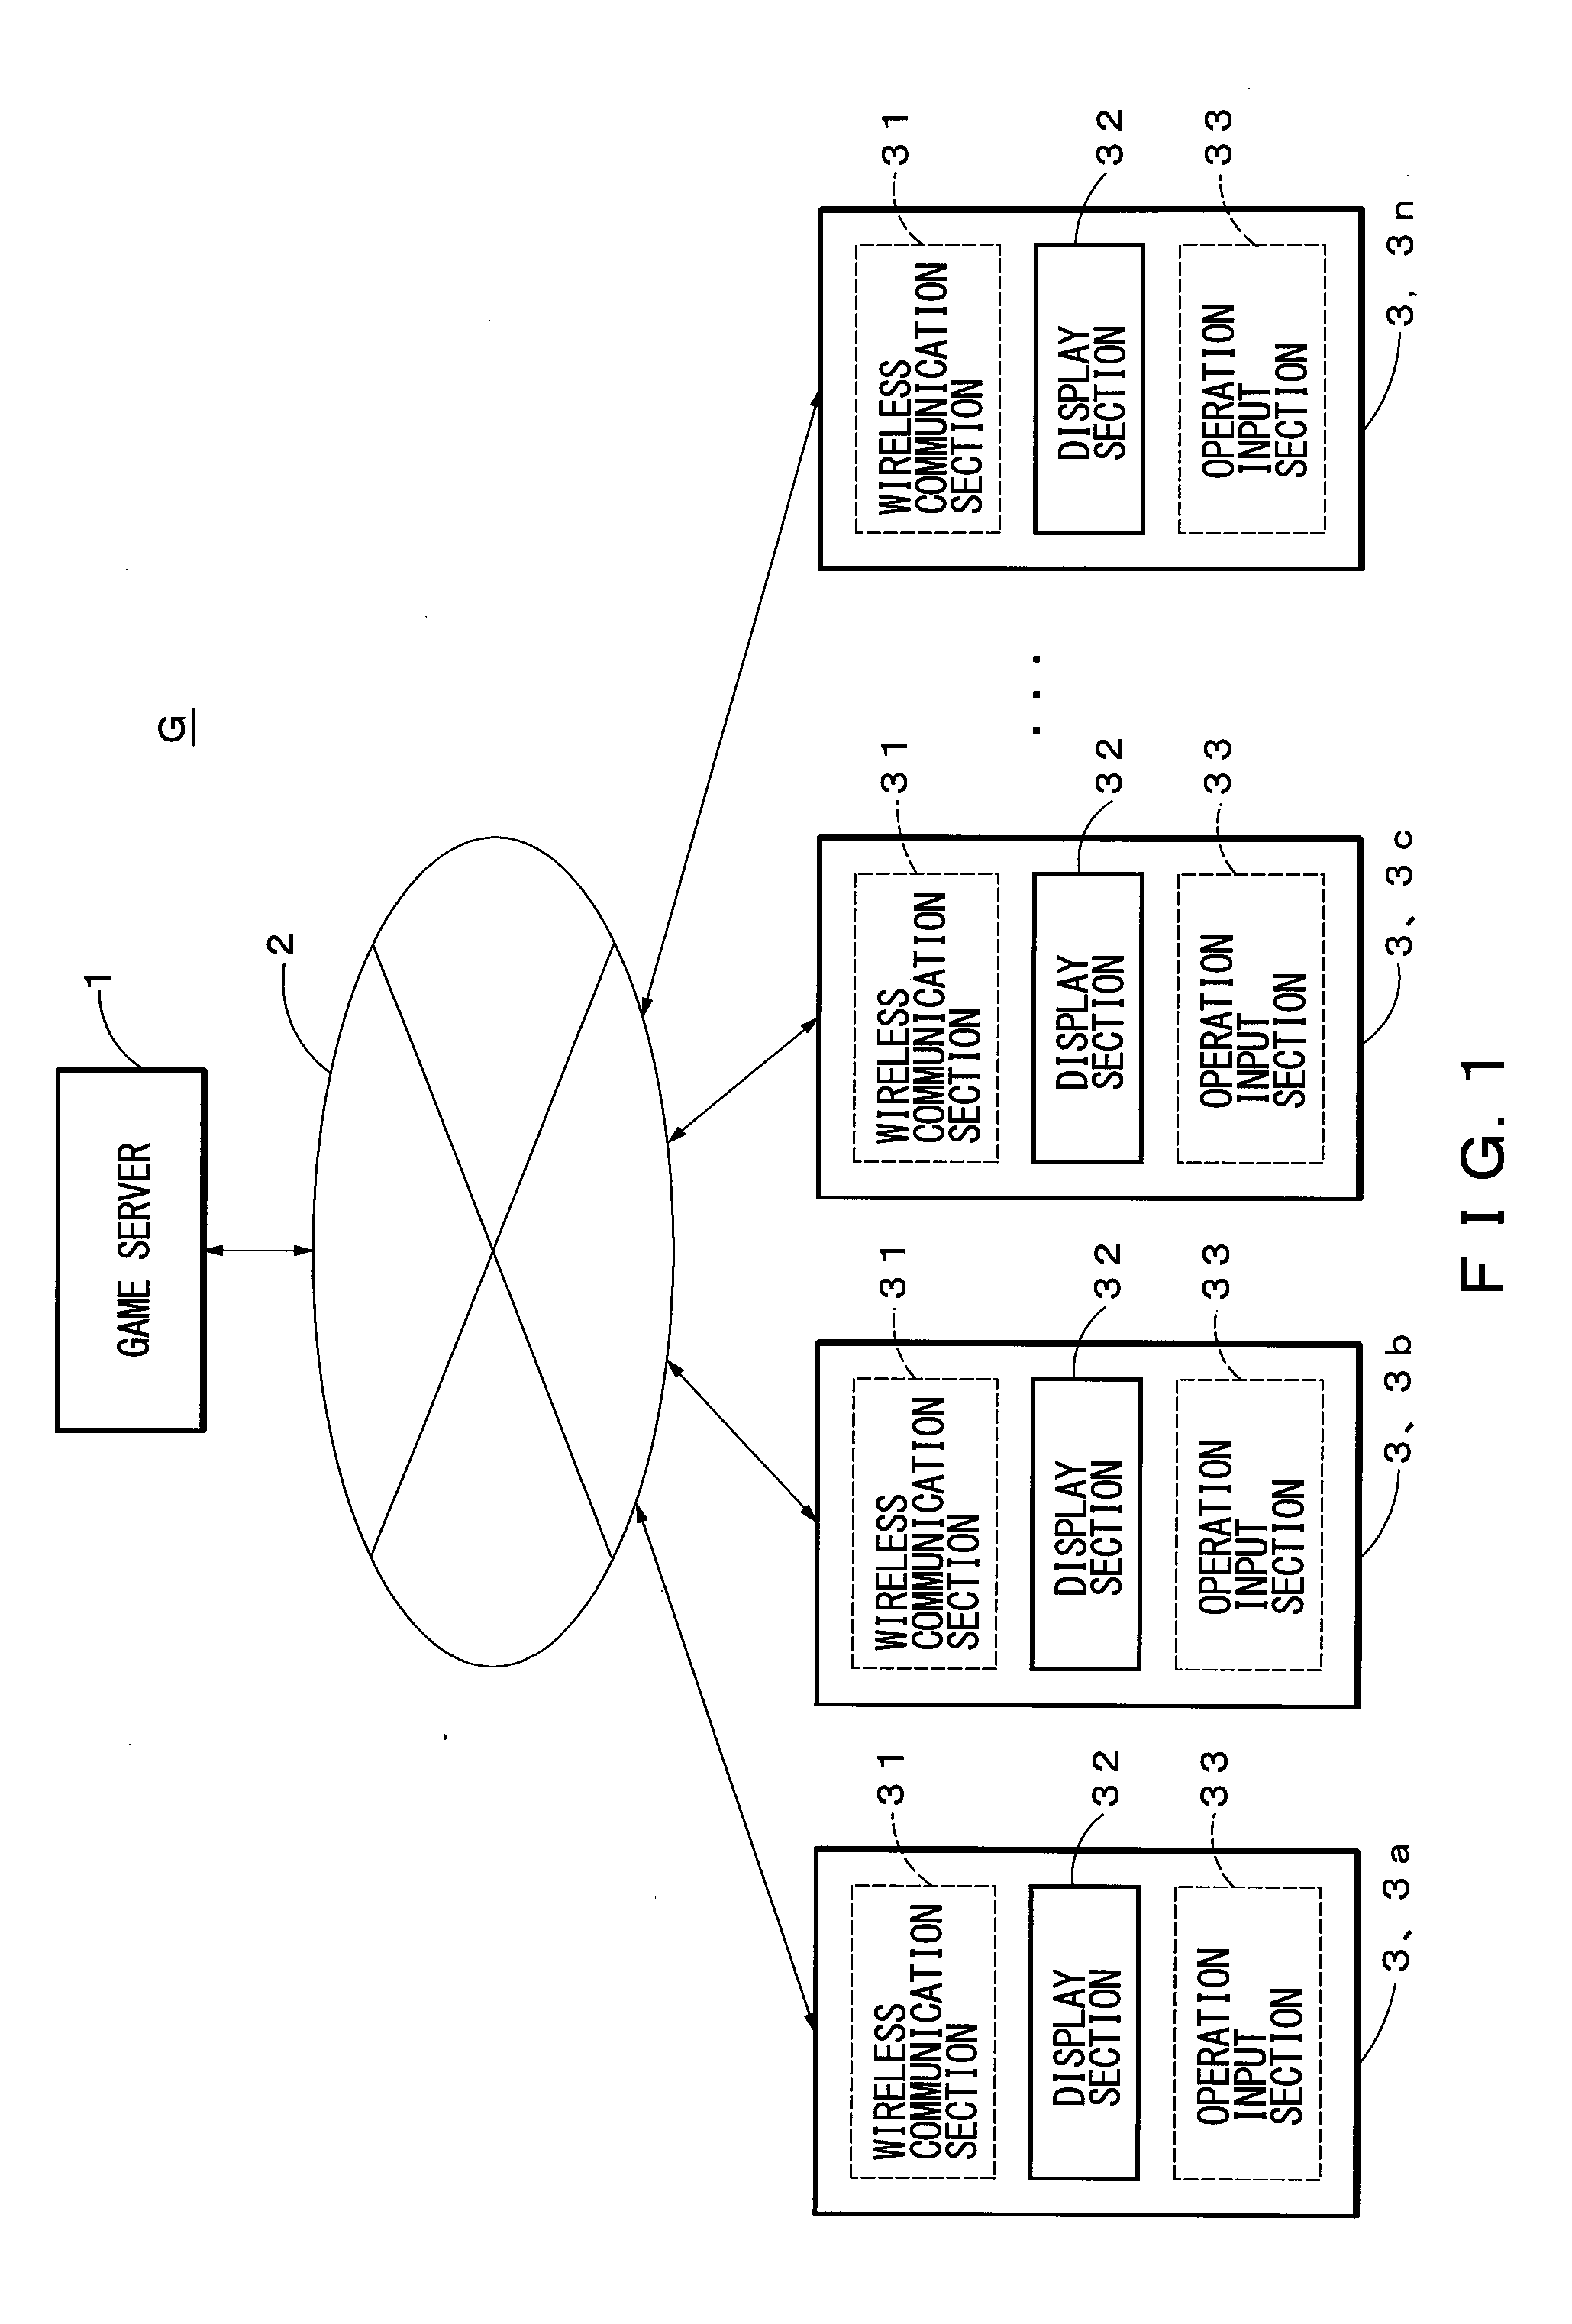 Game server, game controlling method thereof, game system, and non-transitory computer-readable medium